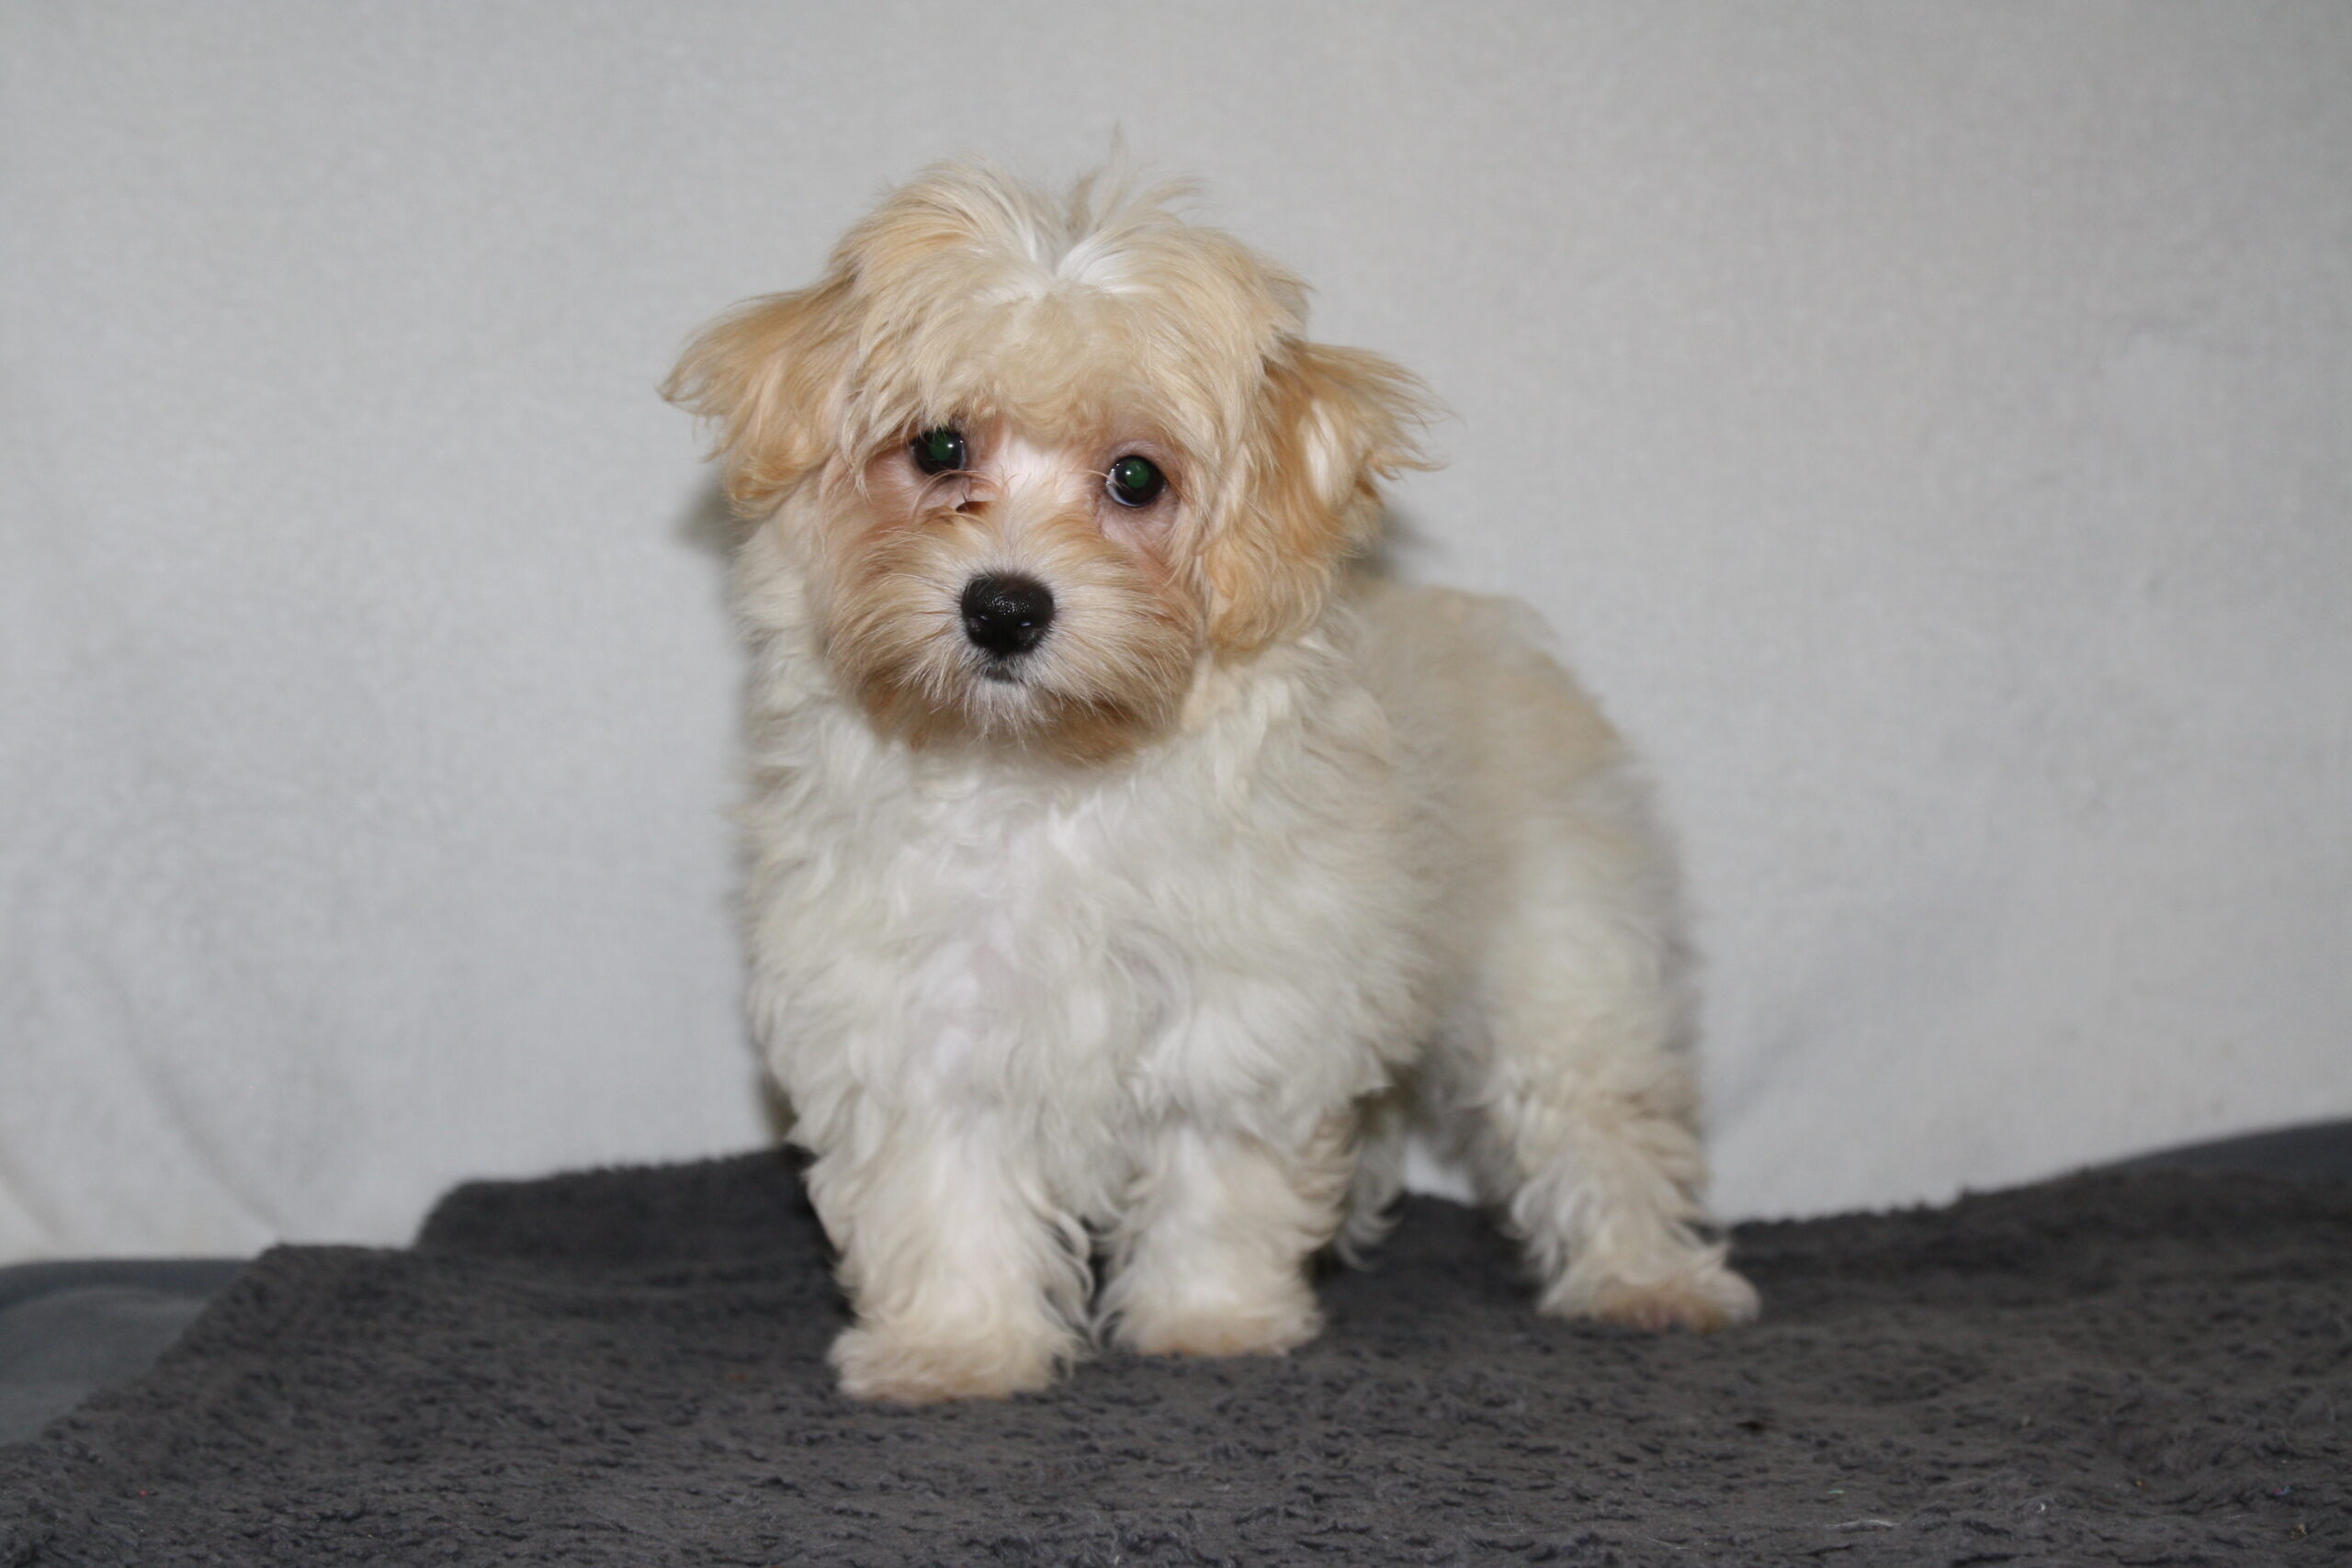 "Rosie"
DOB: 6/7/2022
Breed: Havanese
Sex: Female
Availability: Ready to go home.
Price: $1000